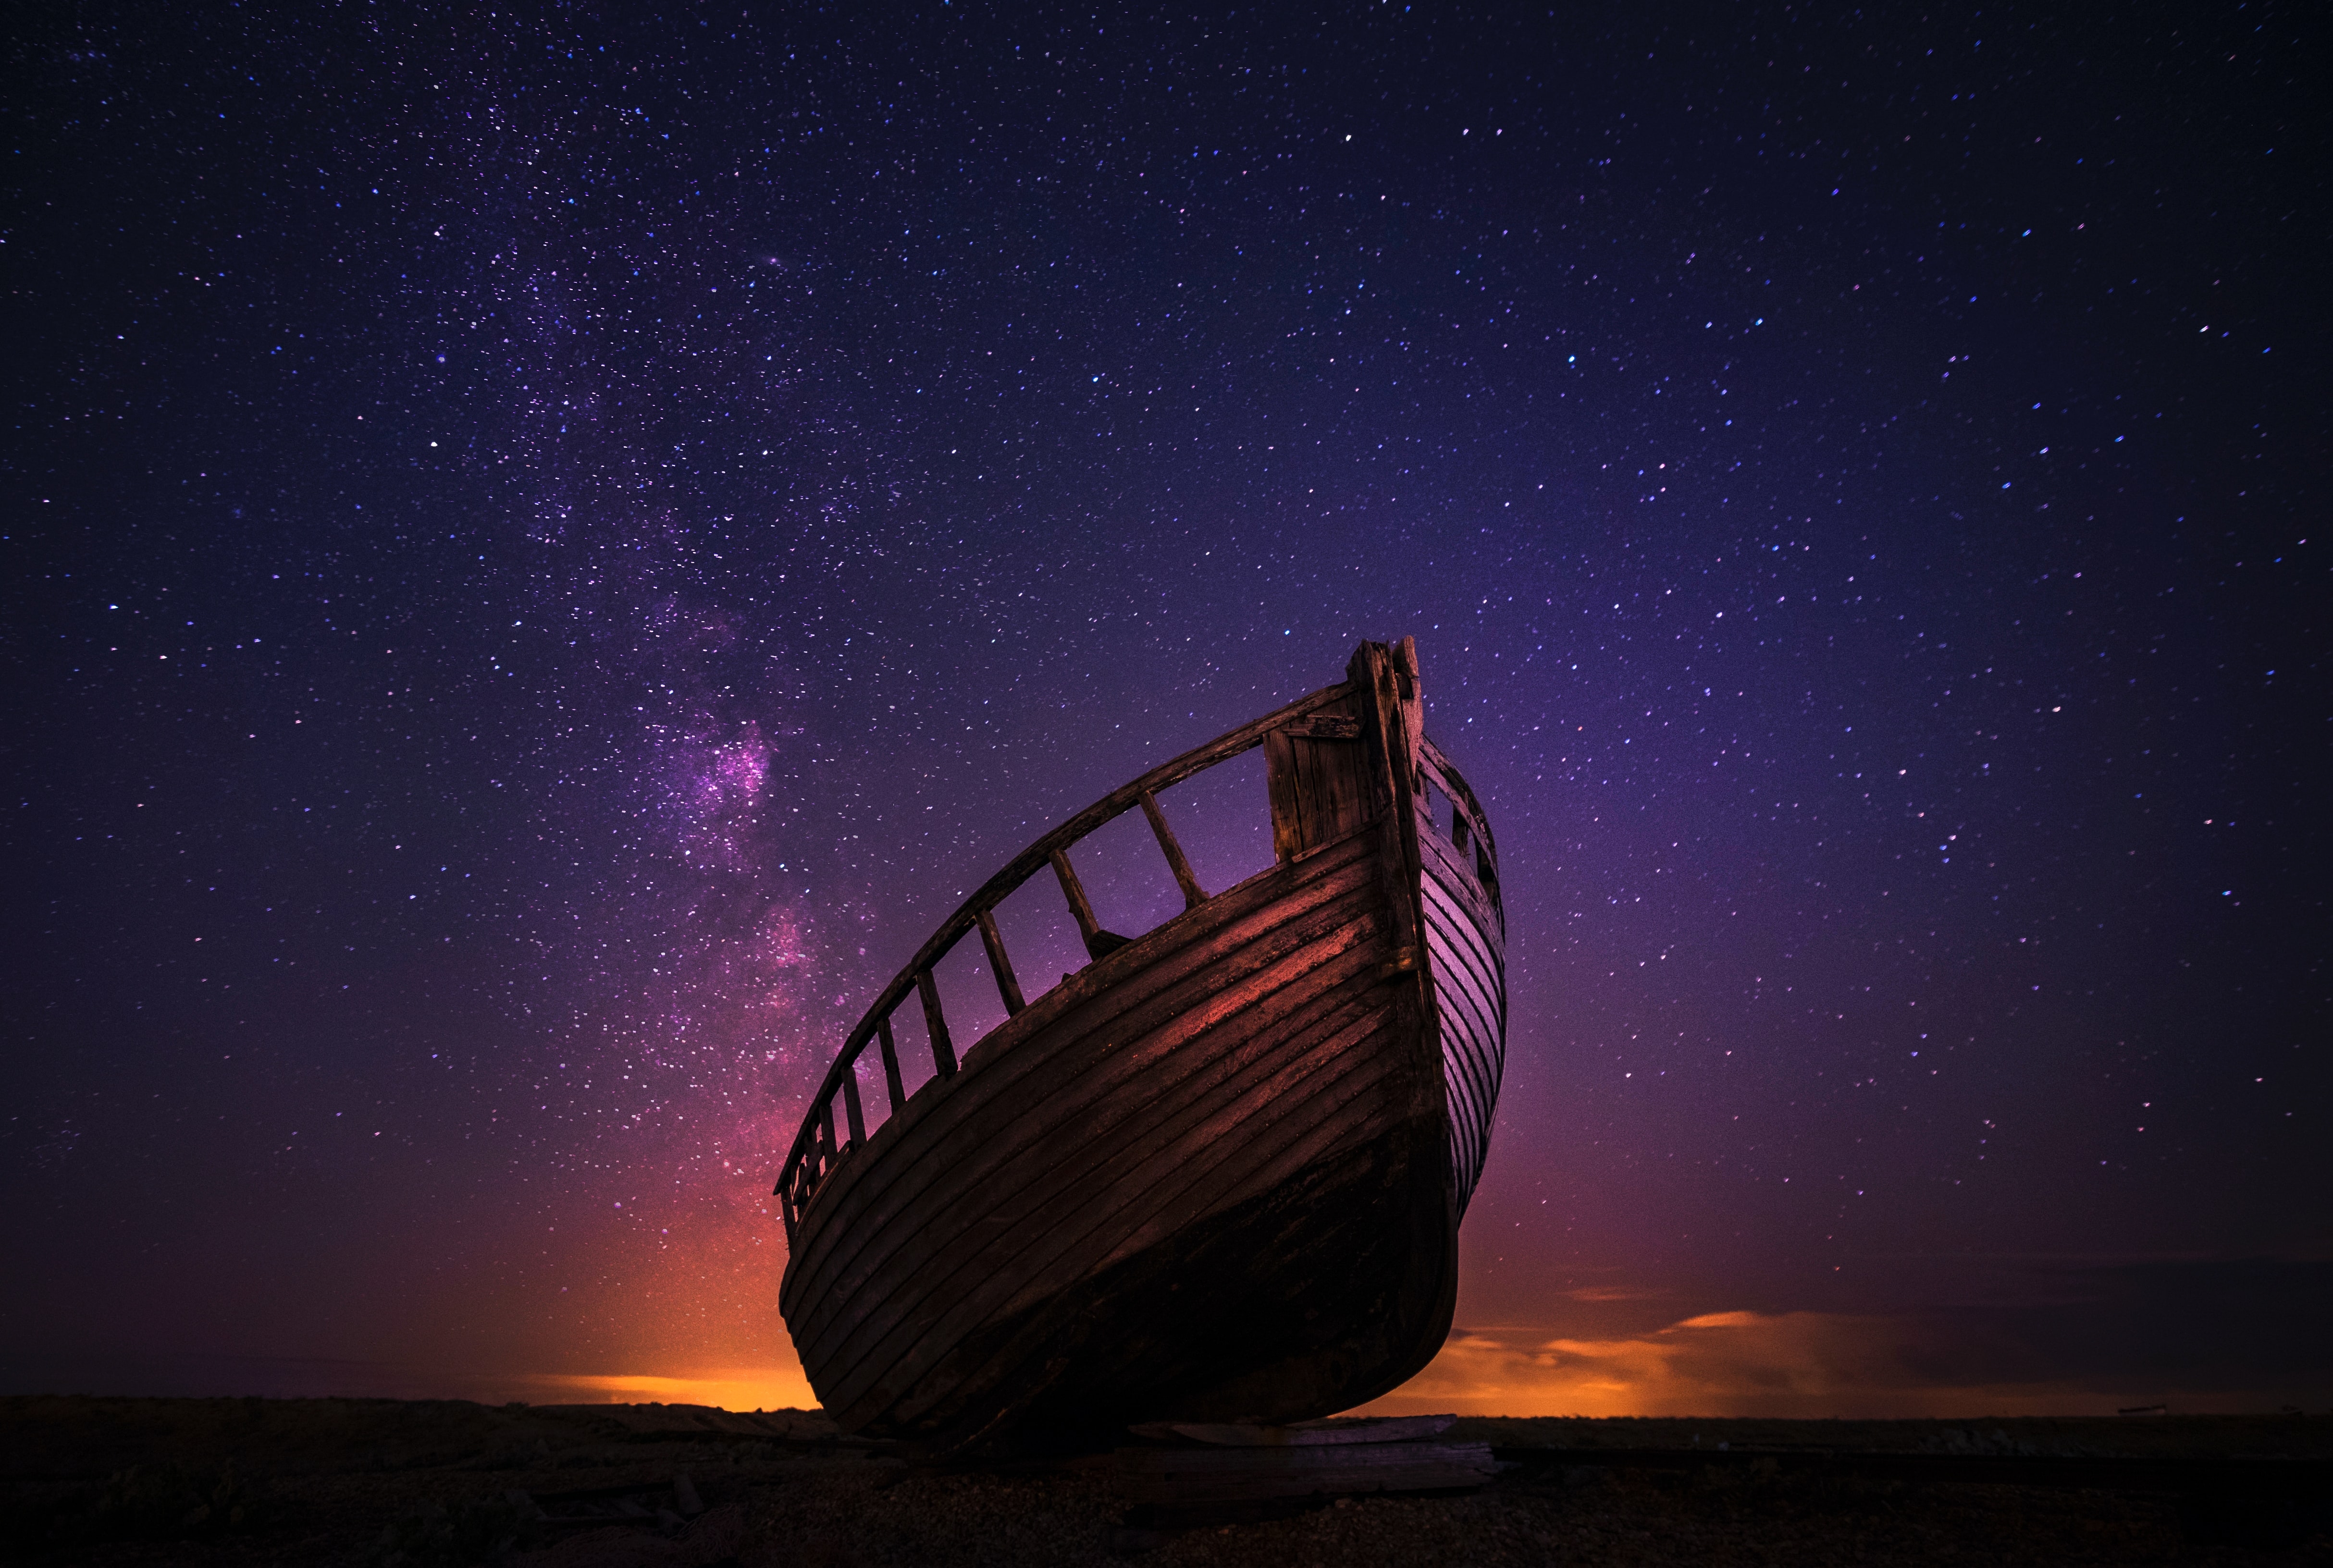 HD wallpaper, Outer Space, Milky Way, Sailing Boat, Starry Sky, Night Time, 5K, Wrecked Boat, Seashore